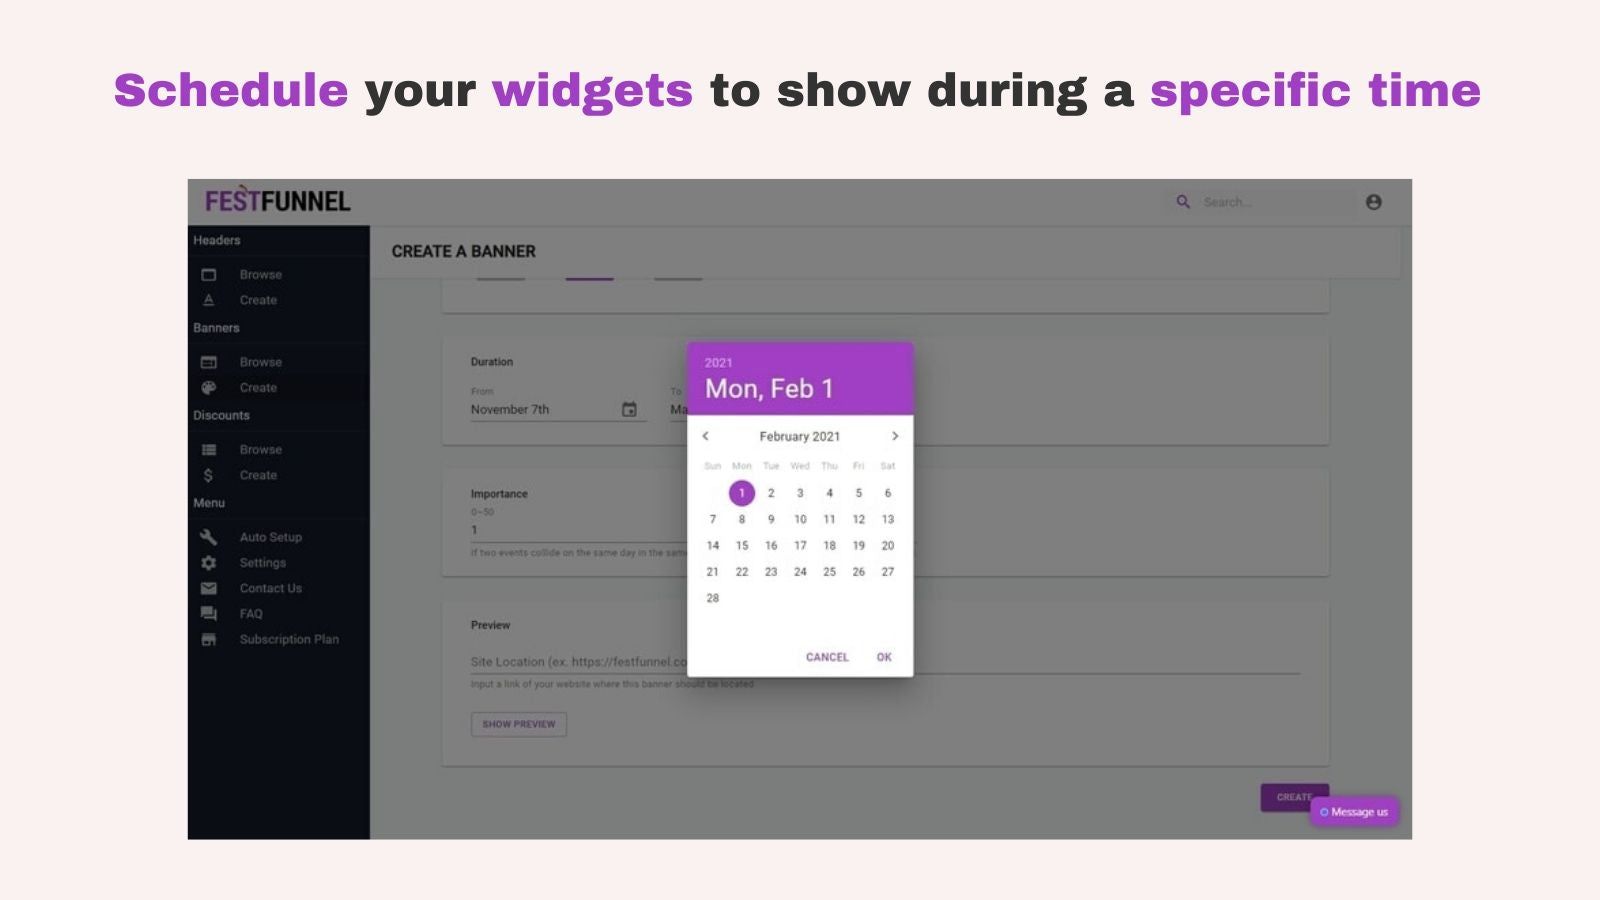 Schedule your widgets to show during a specific time